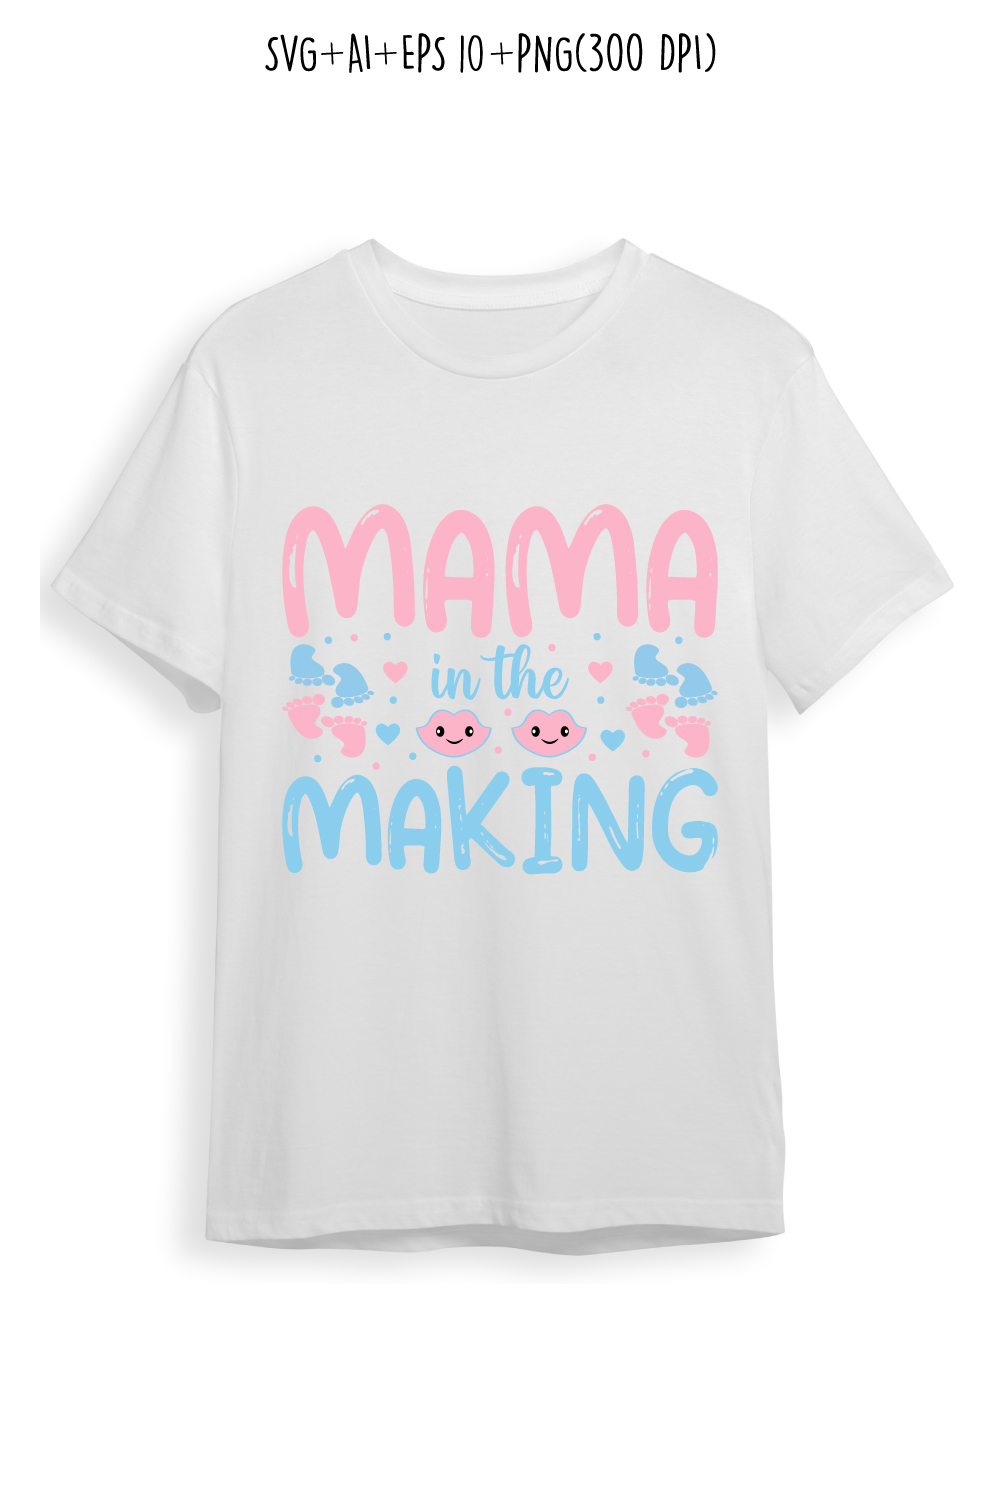 mama in the making pregnancy t-shirt design for t-shirts, cards, frame artwork, phone cases, bags, mugs, stickers, tumblers, print, etc pinterest preview image.